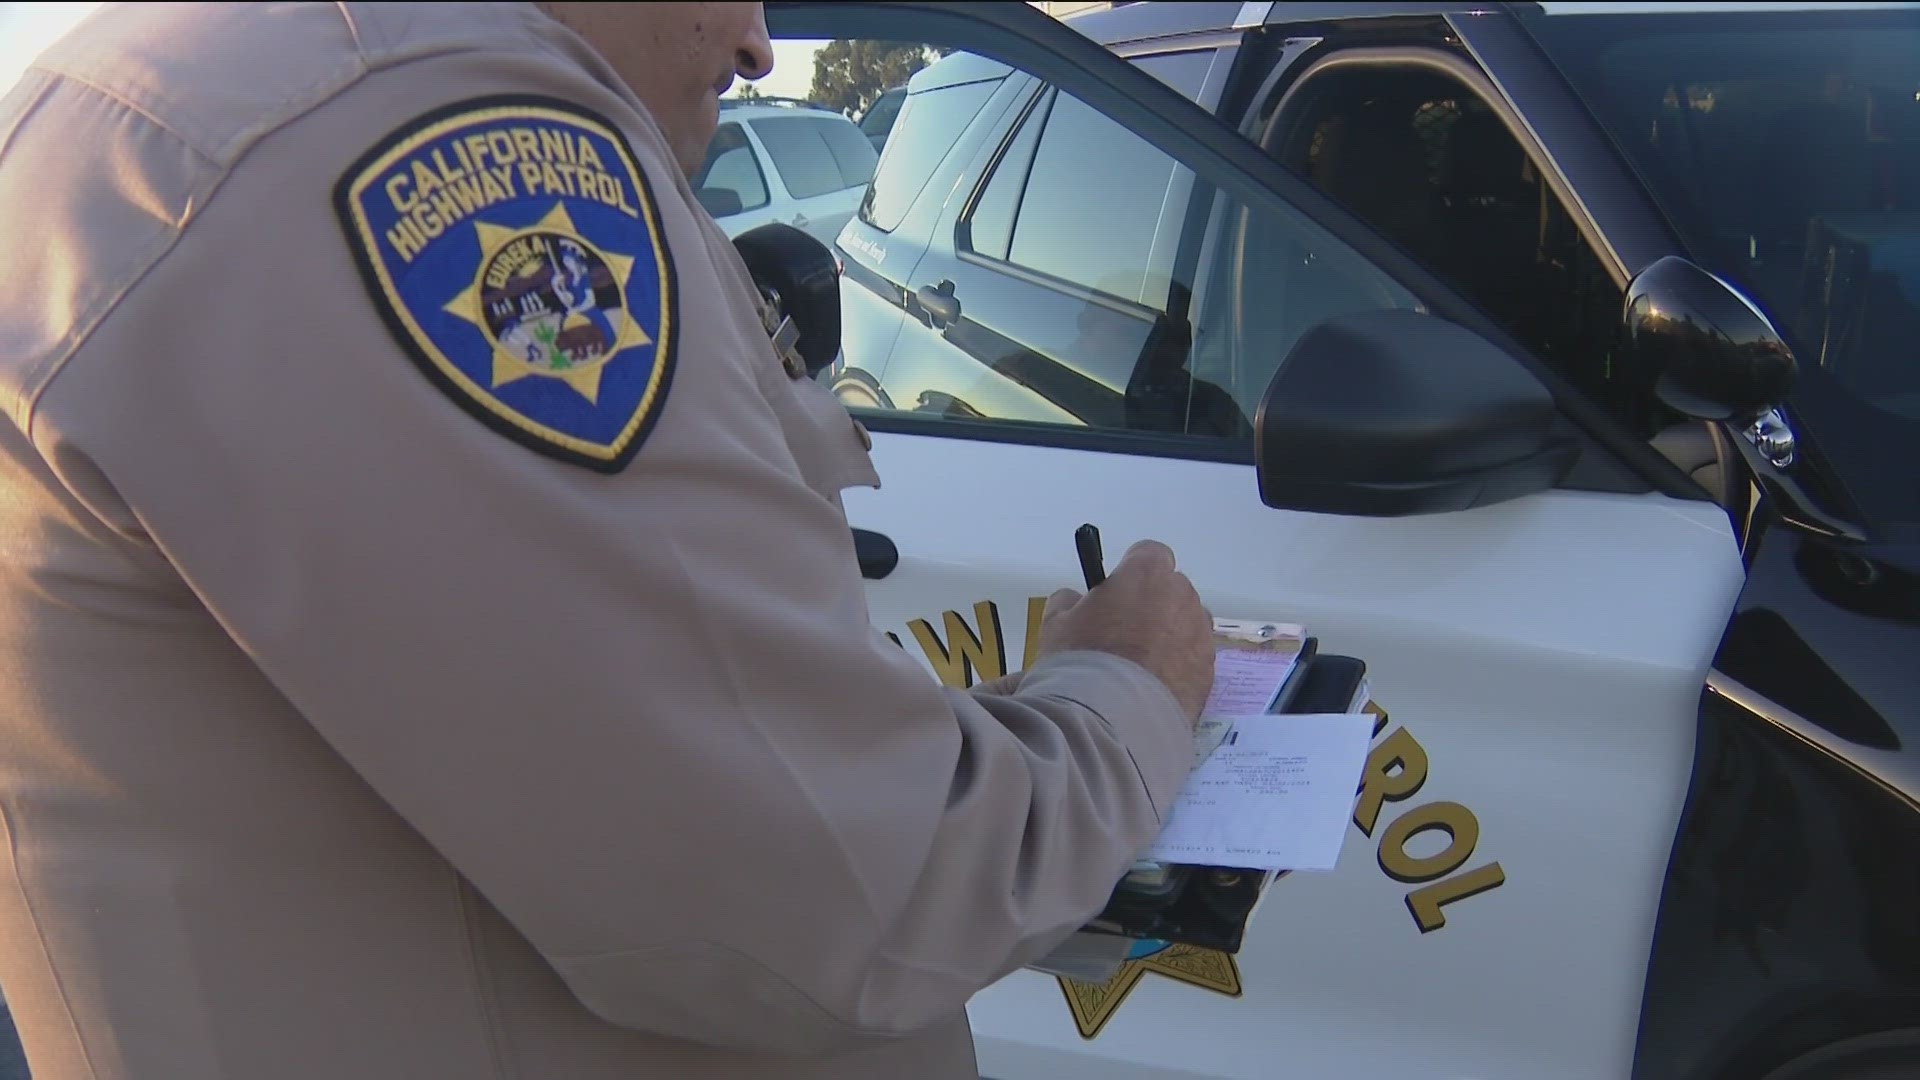 The California Highway Patrol is stepping up enforcement along the border to help ease traffic congestion, road rage and dangerous driving.